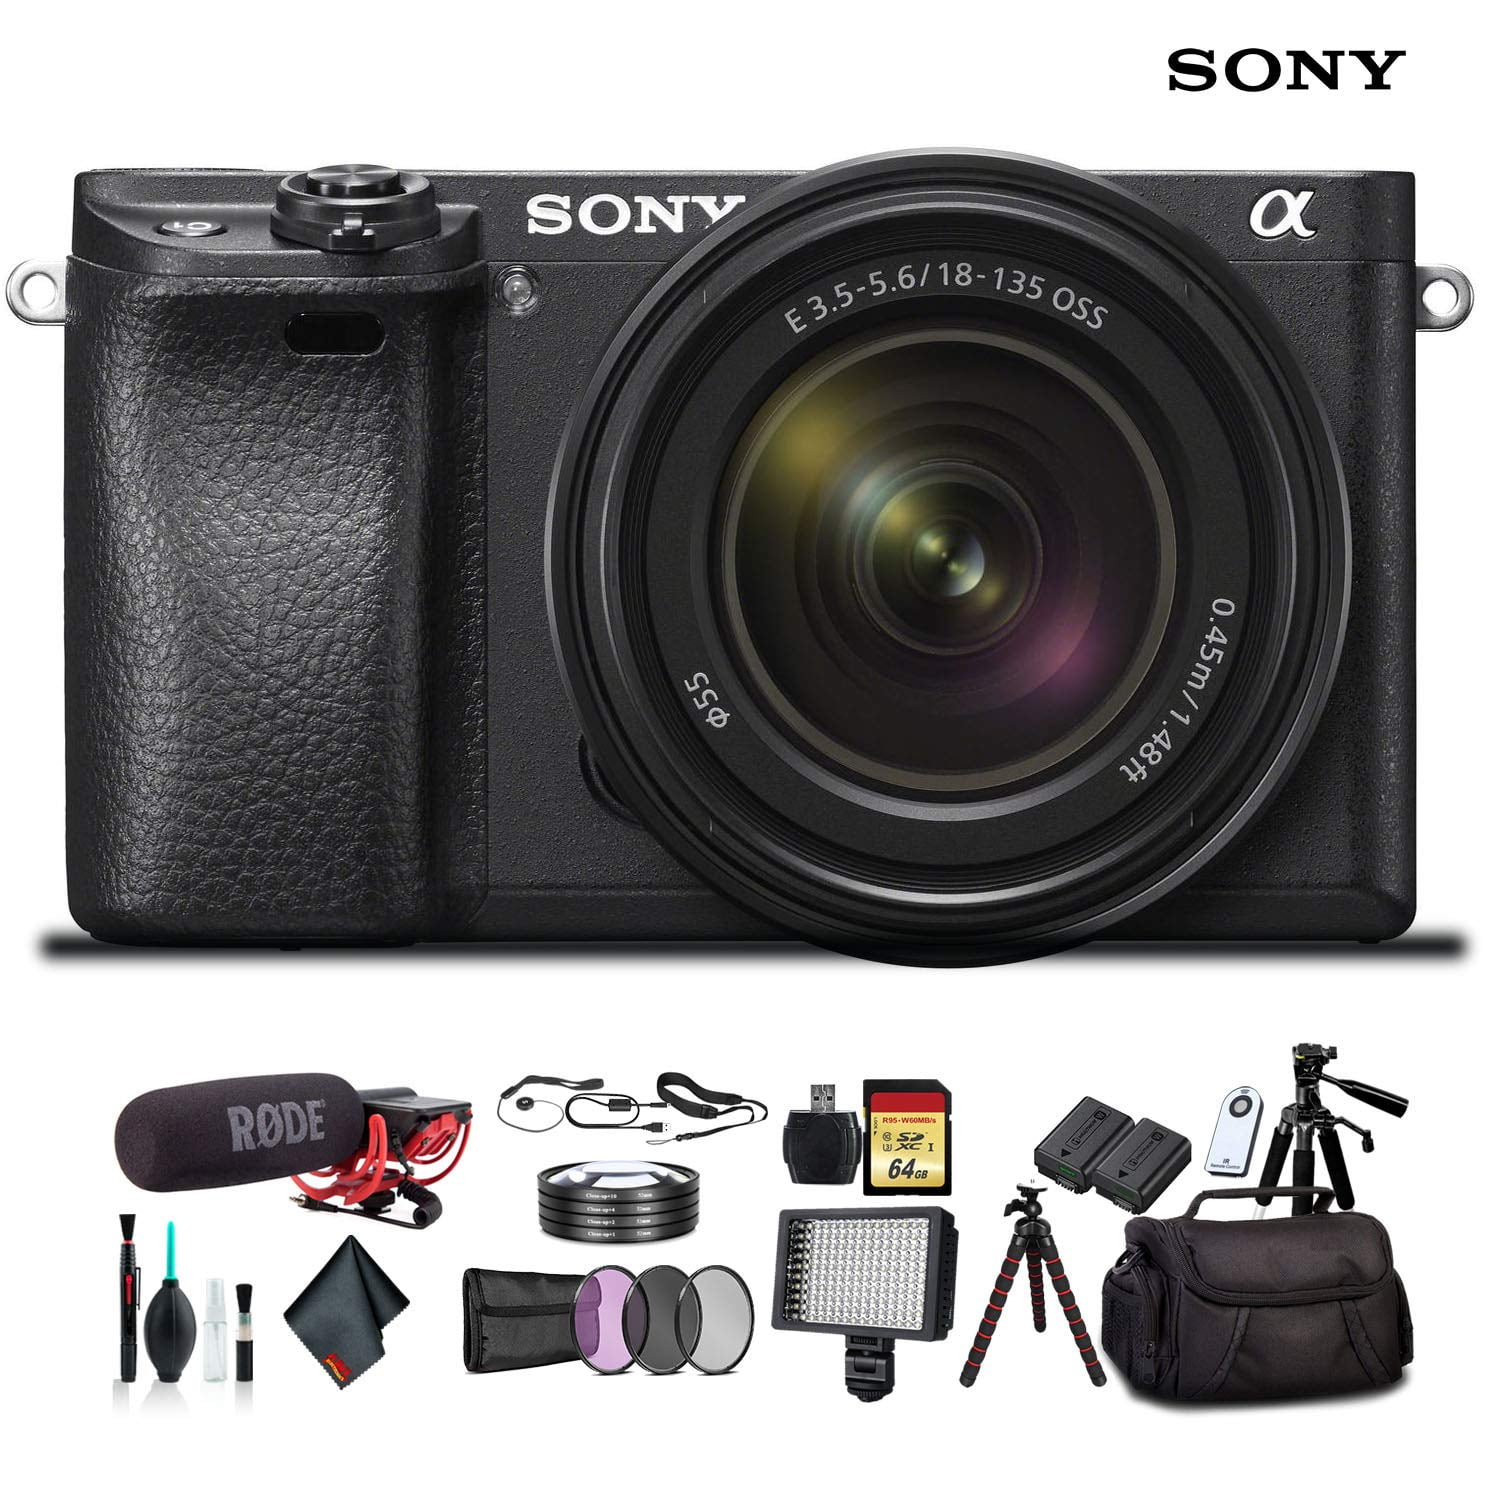 Sony Alpha a6300 Mirrorless Camera with 18-135mm Lens With Soft Bag,  Zhiyun-Tech WEEBILL Stabilizer, 2x Extra Batteries, Rode Mic, LED Light, 2x  64GB 